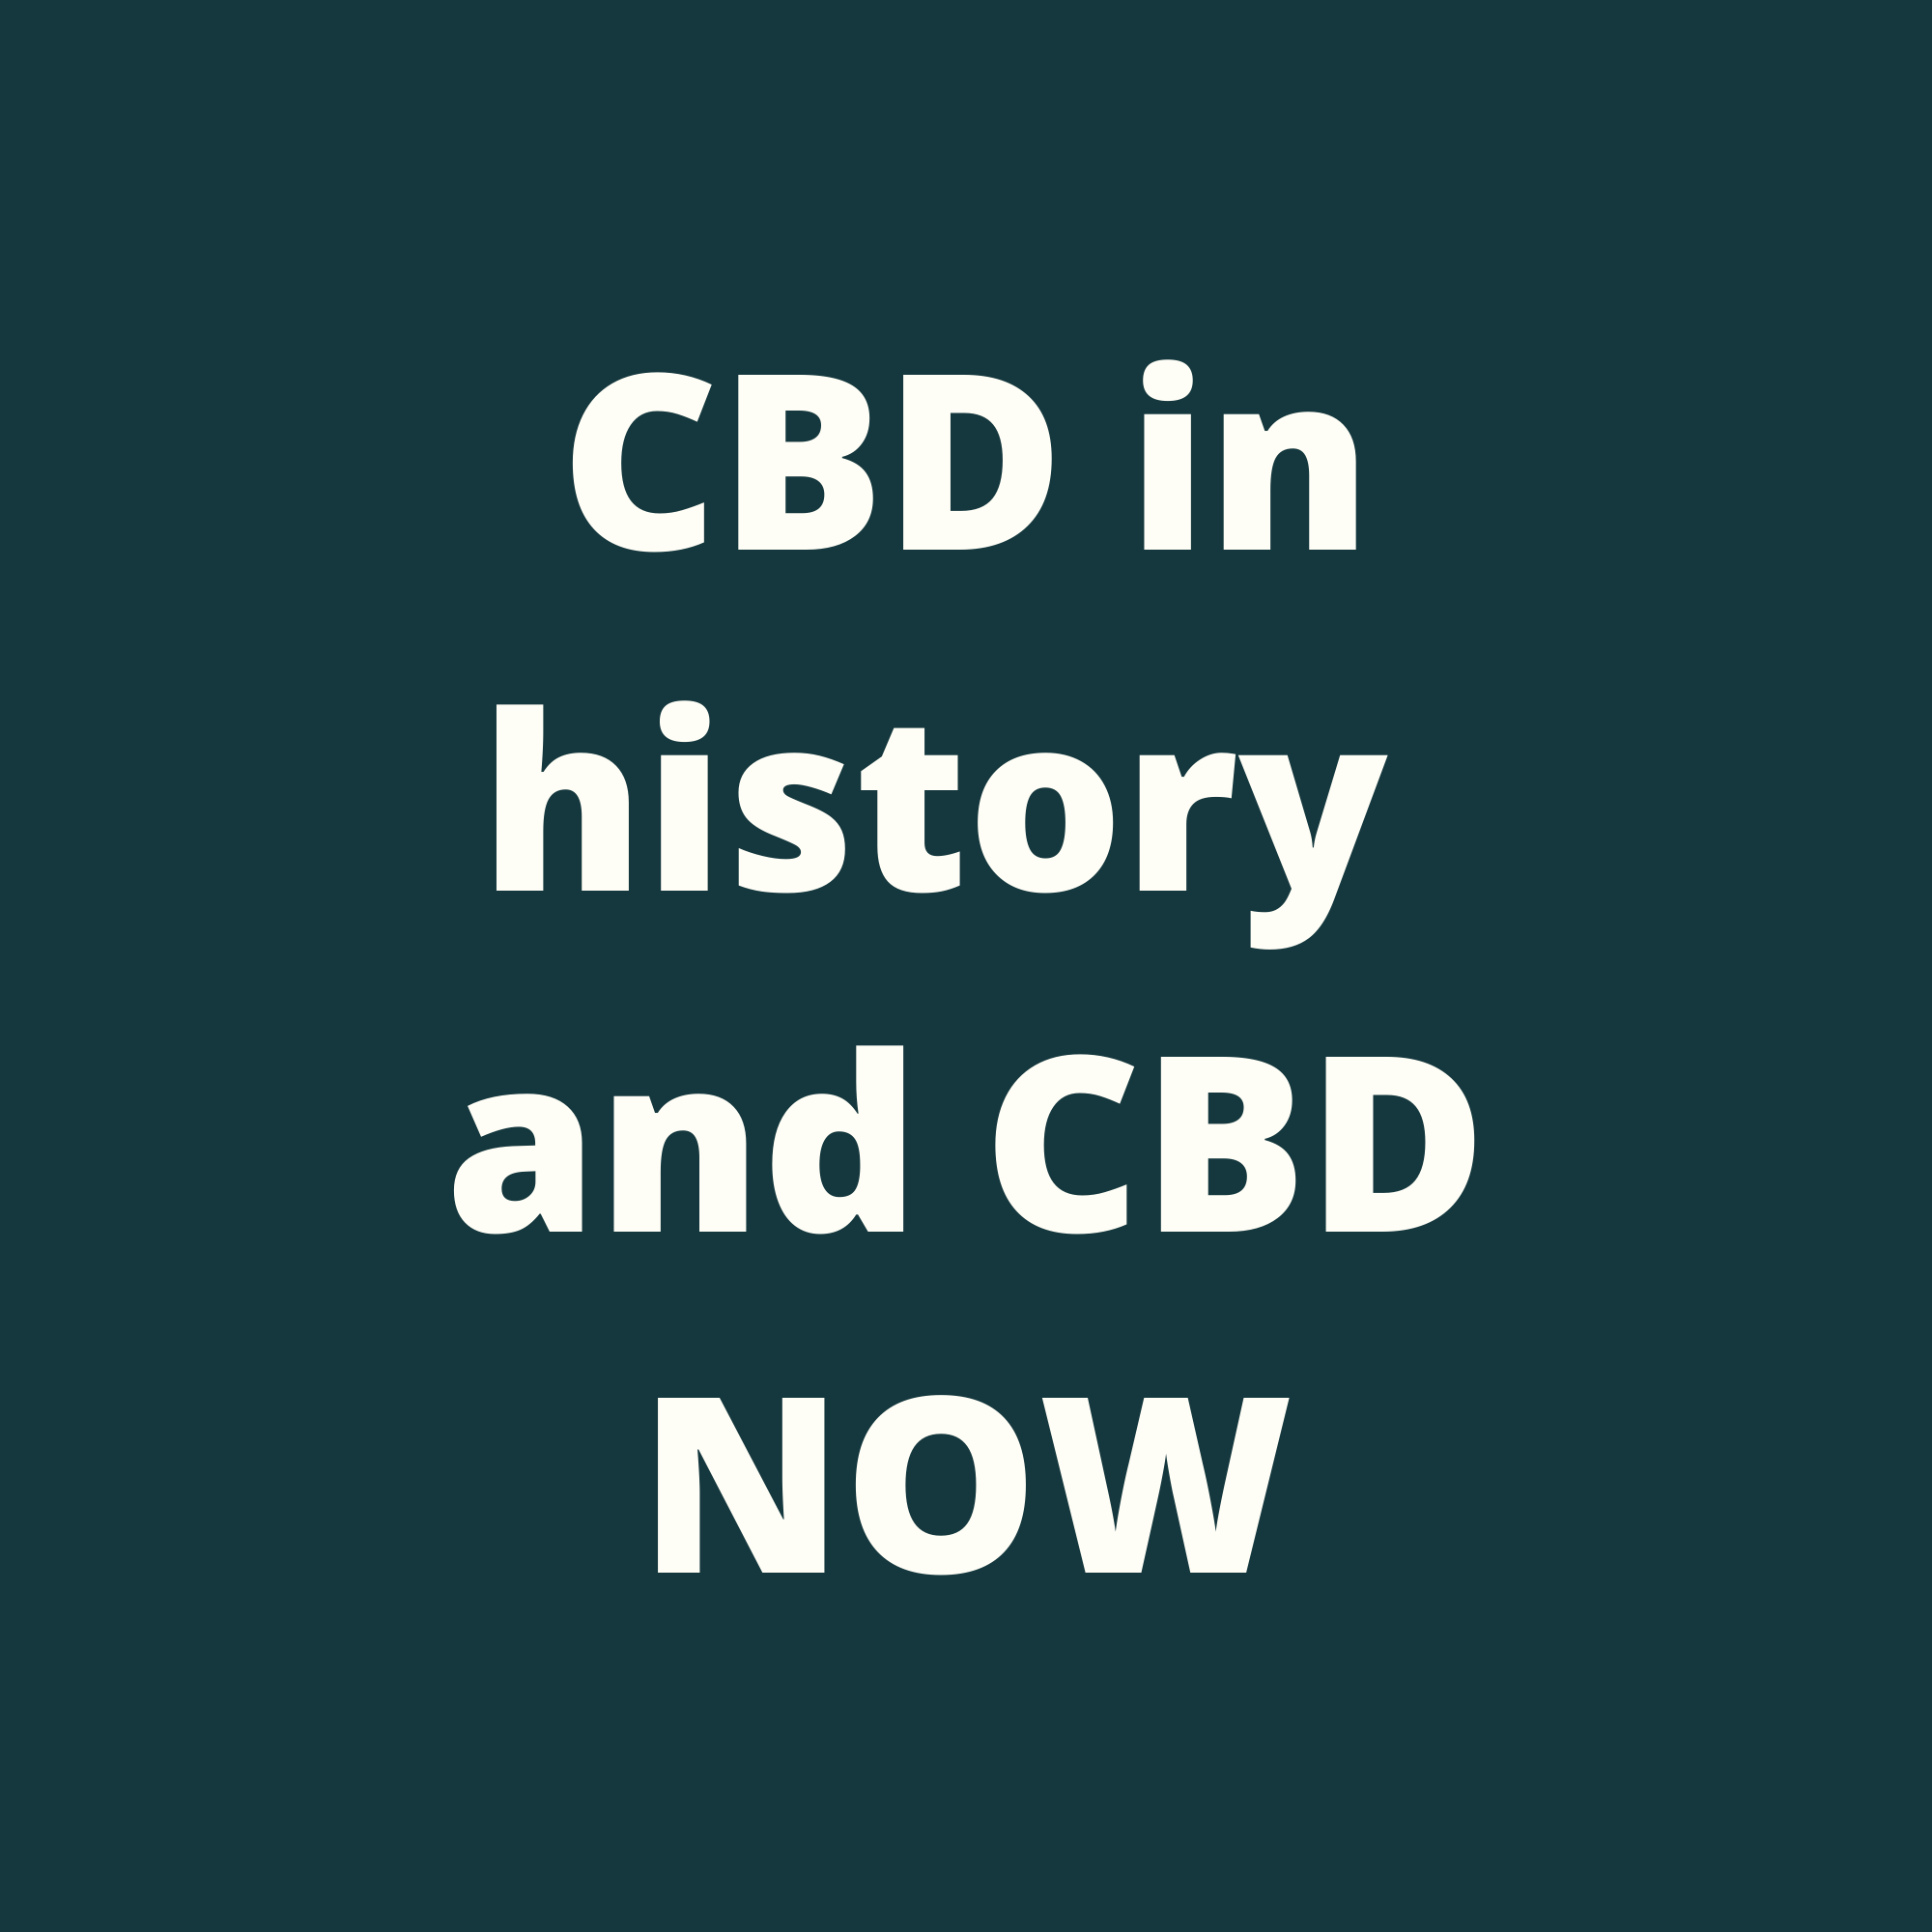 CBD in history, and CBD now